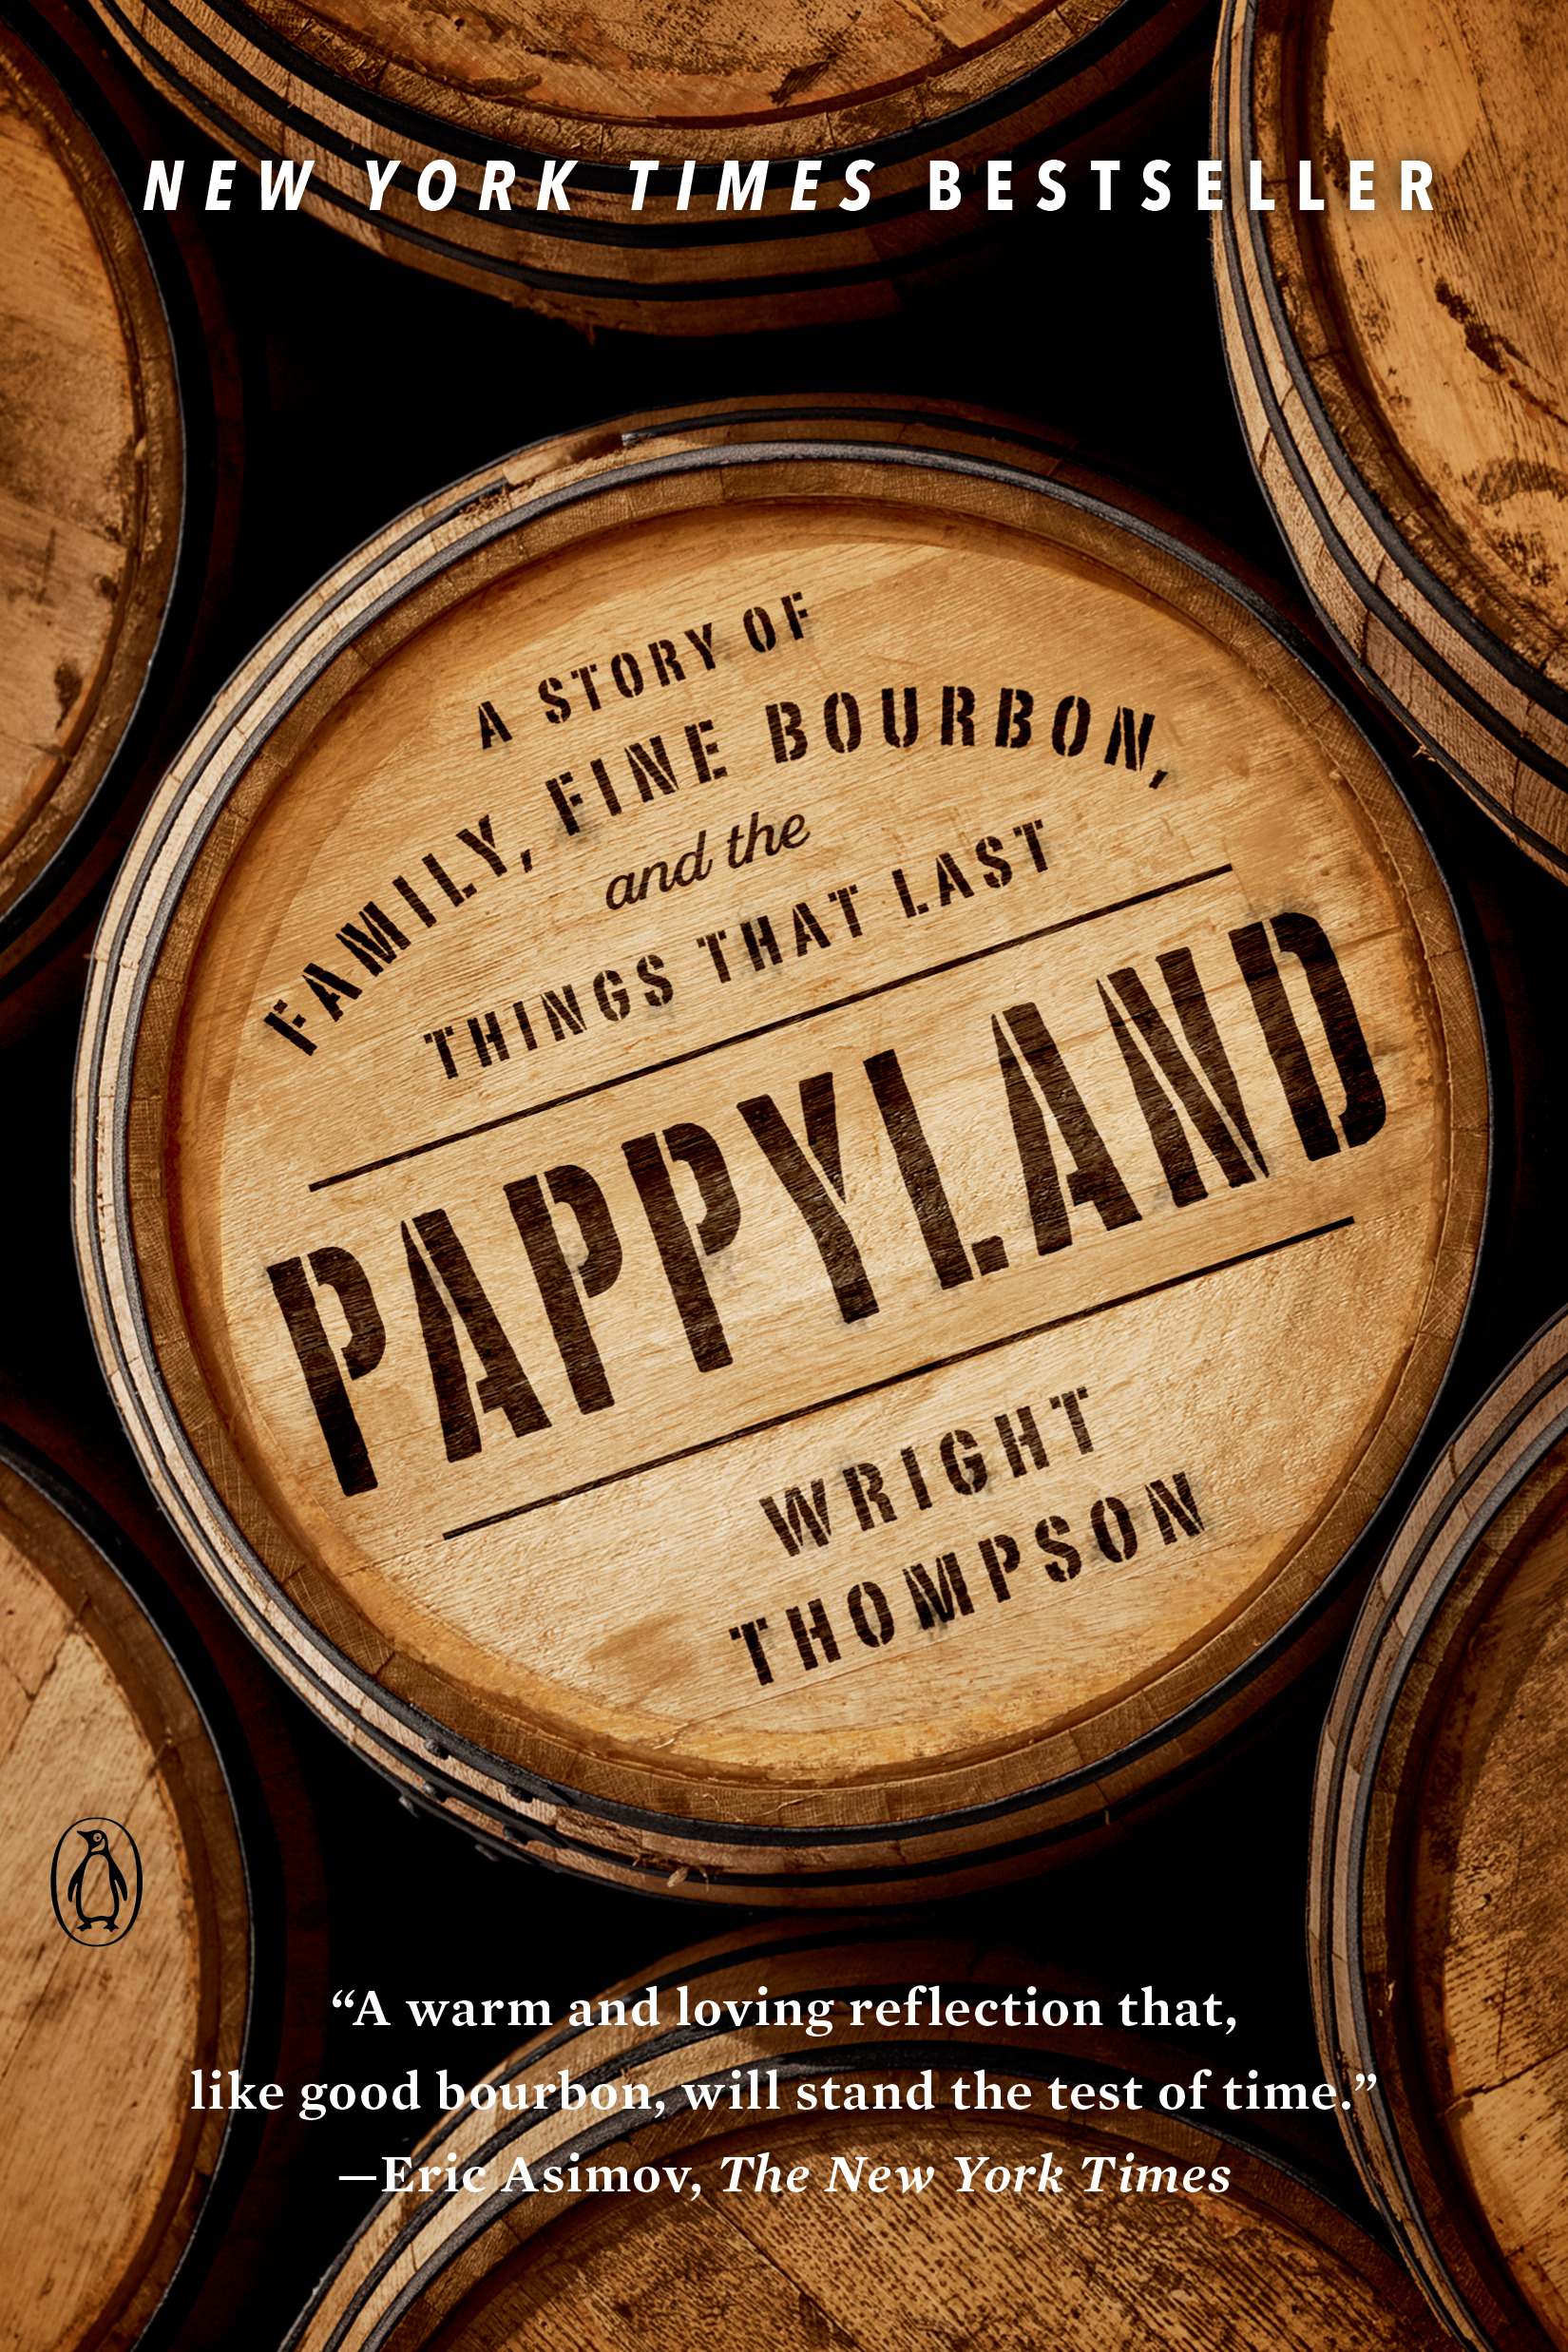 Pappyland : A Story of Family, Fine Bourbon, and the Things That Last | Biography & Memoir